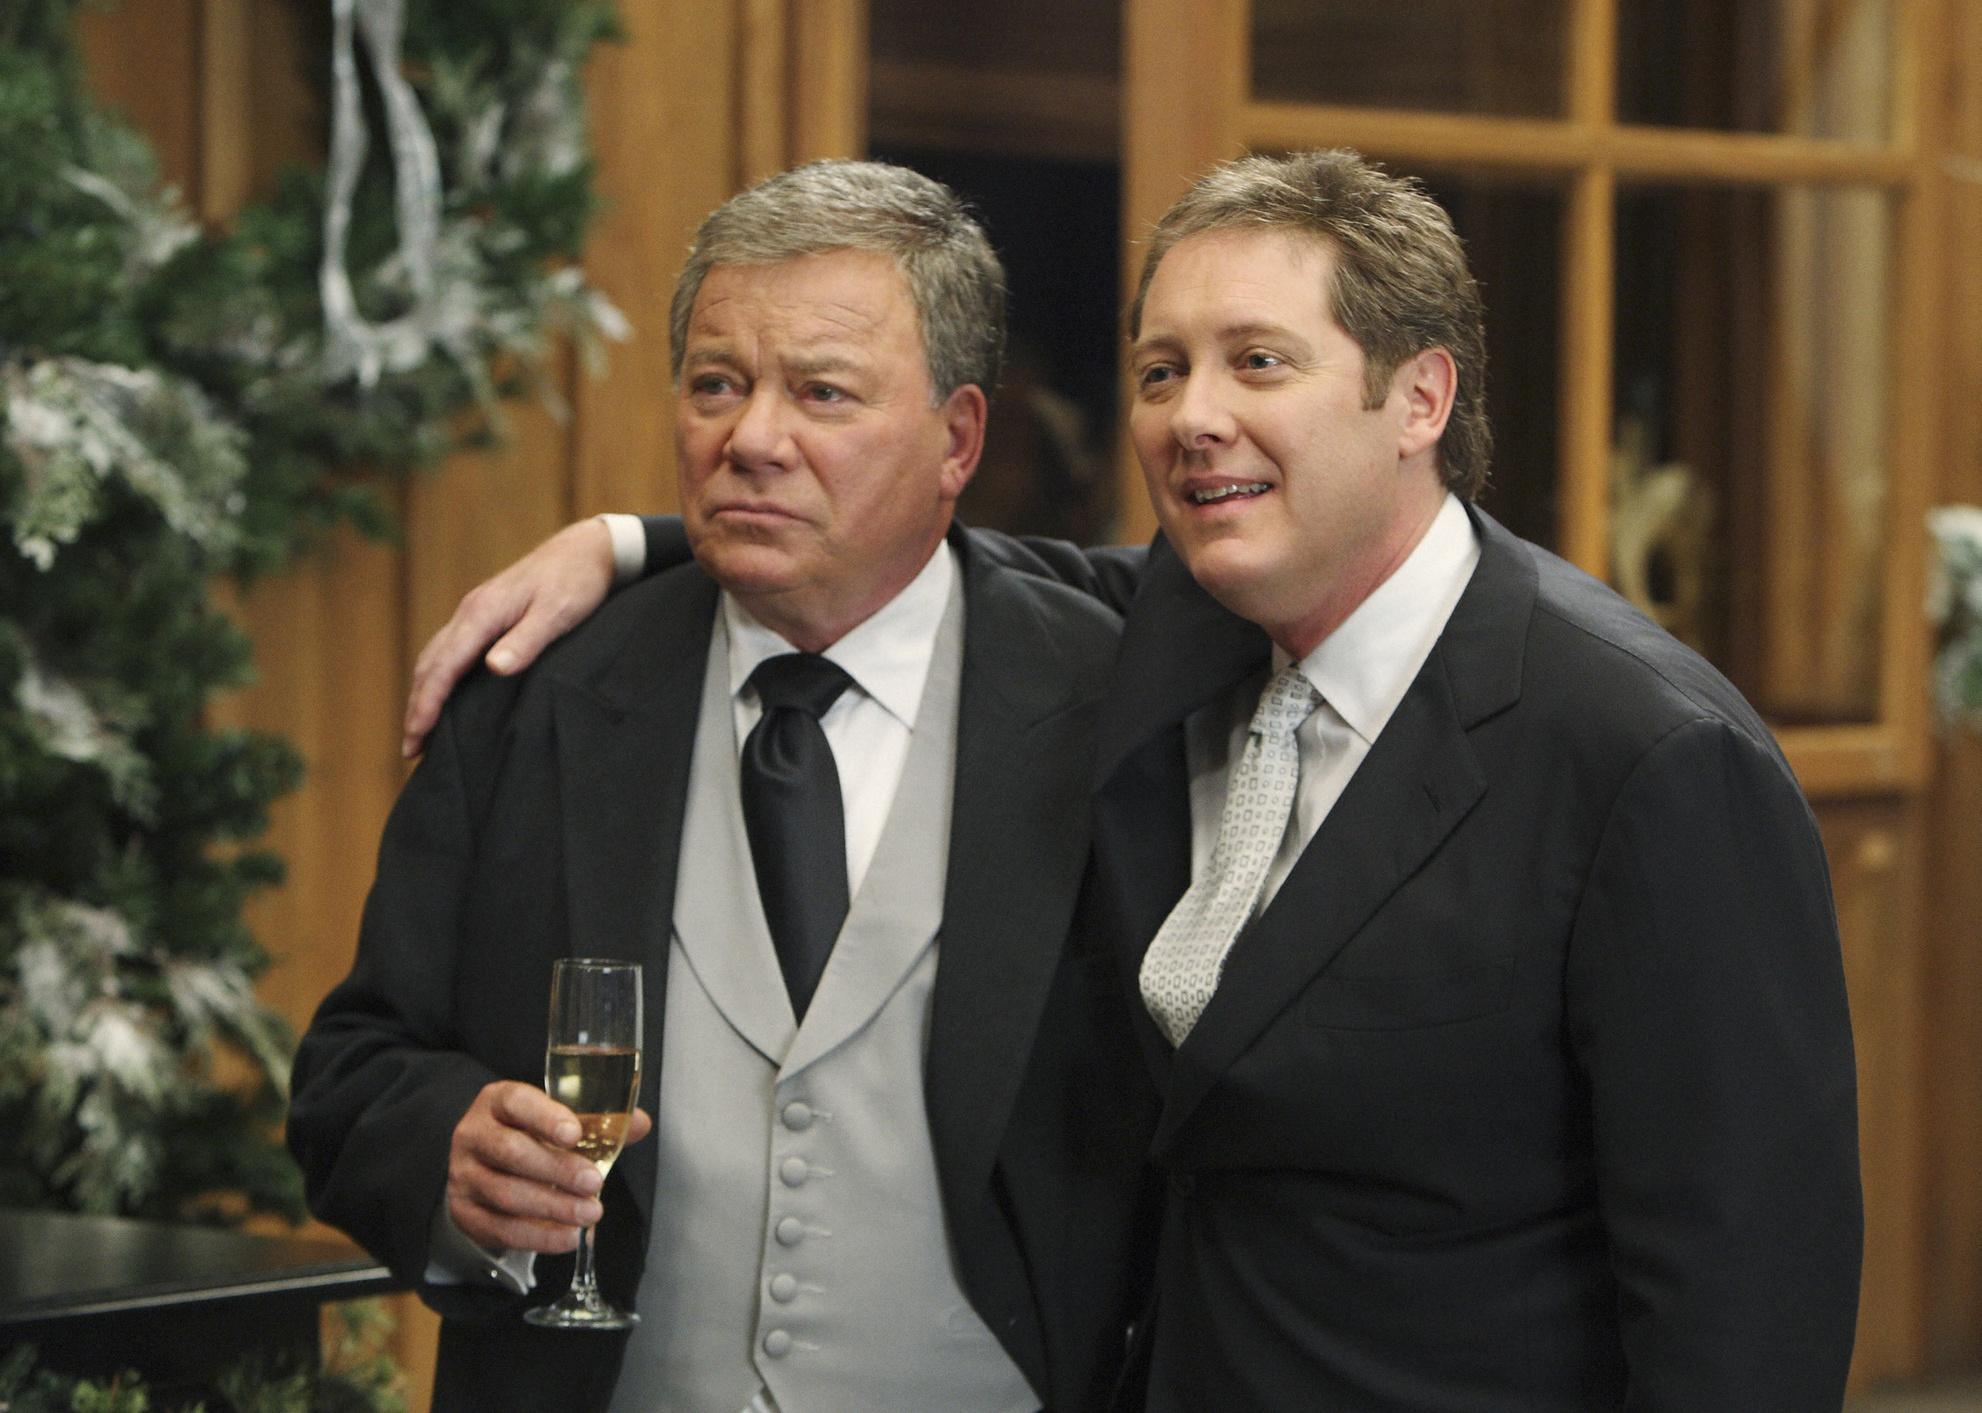 William Shatner and James Spader arm in arm wearing suits and holding champagne.